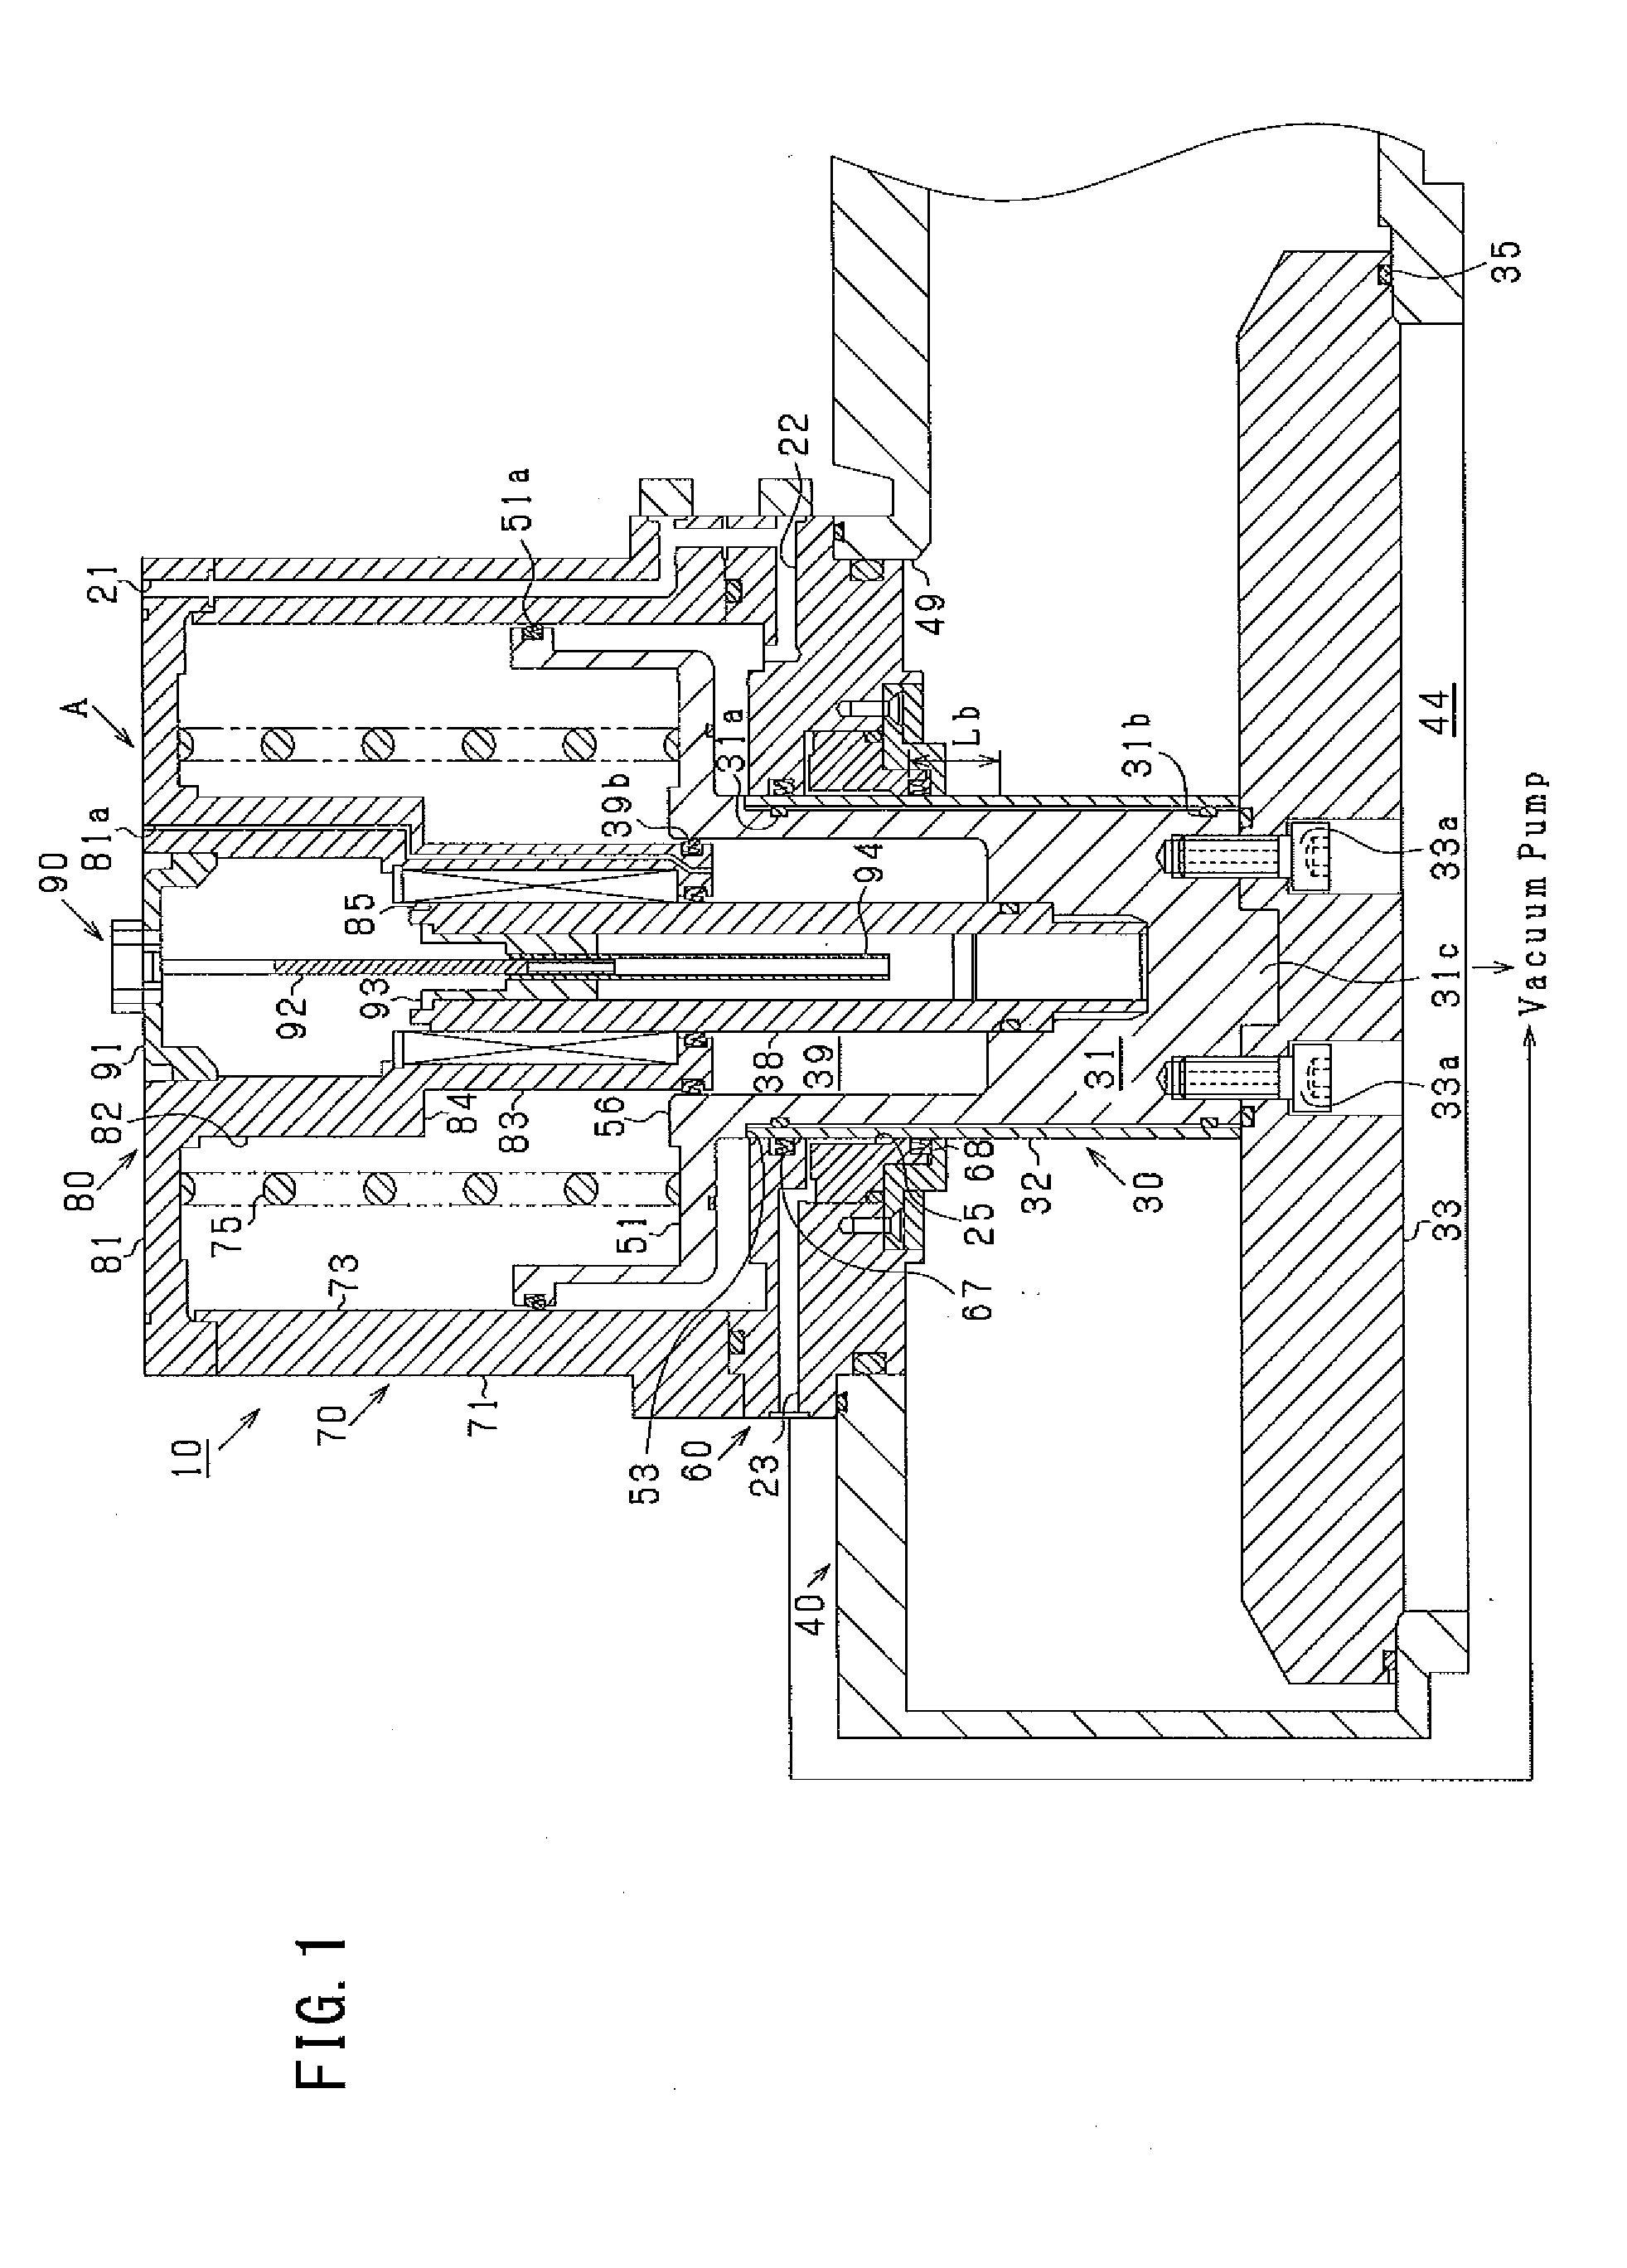 Linear actuator and vacuum control device